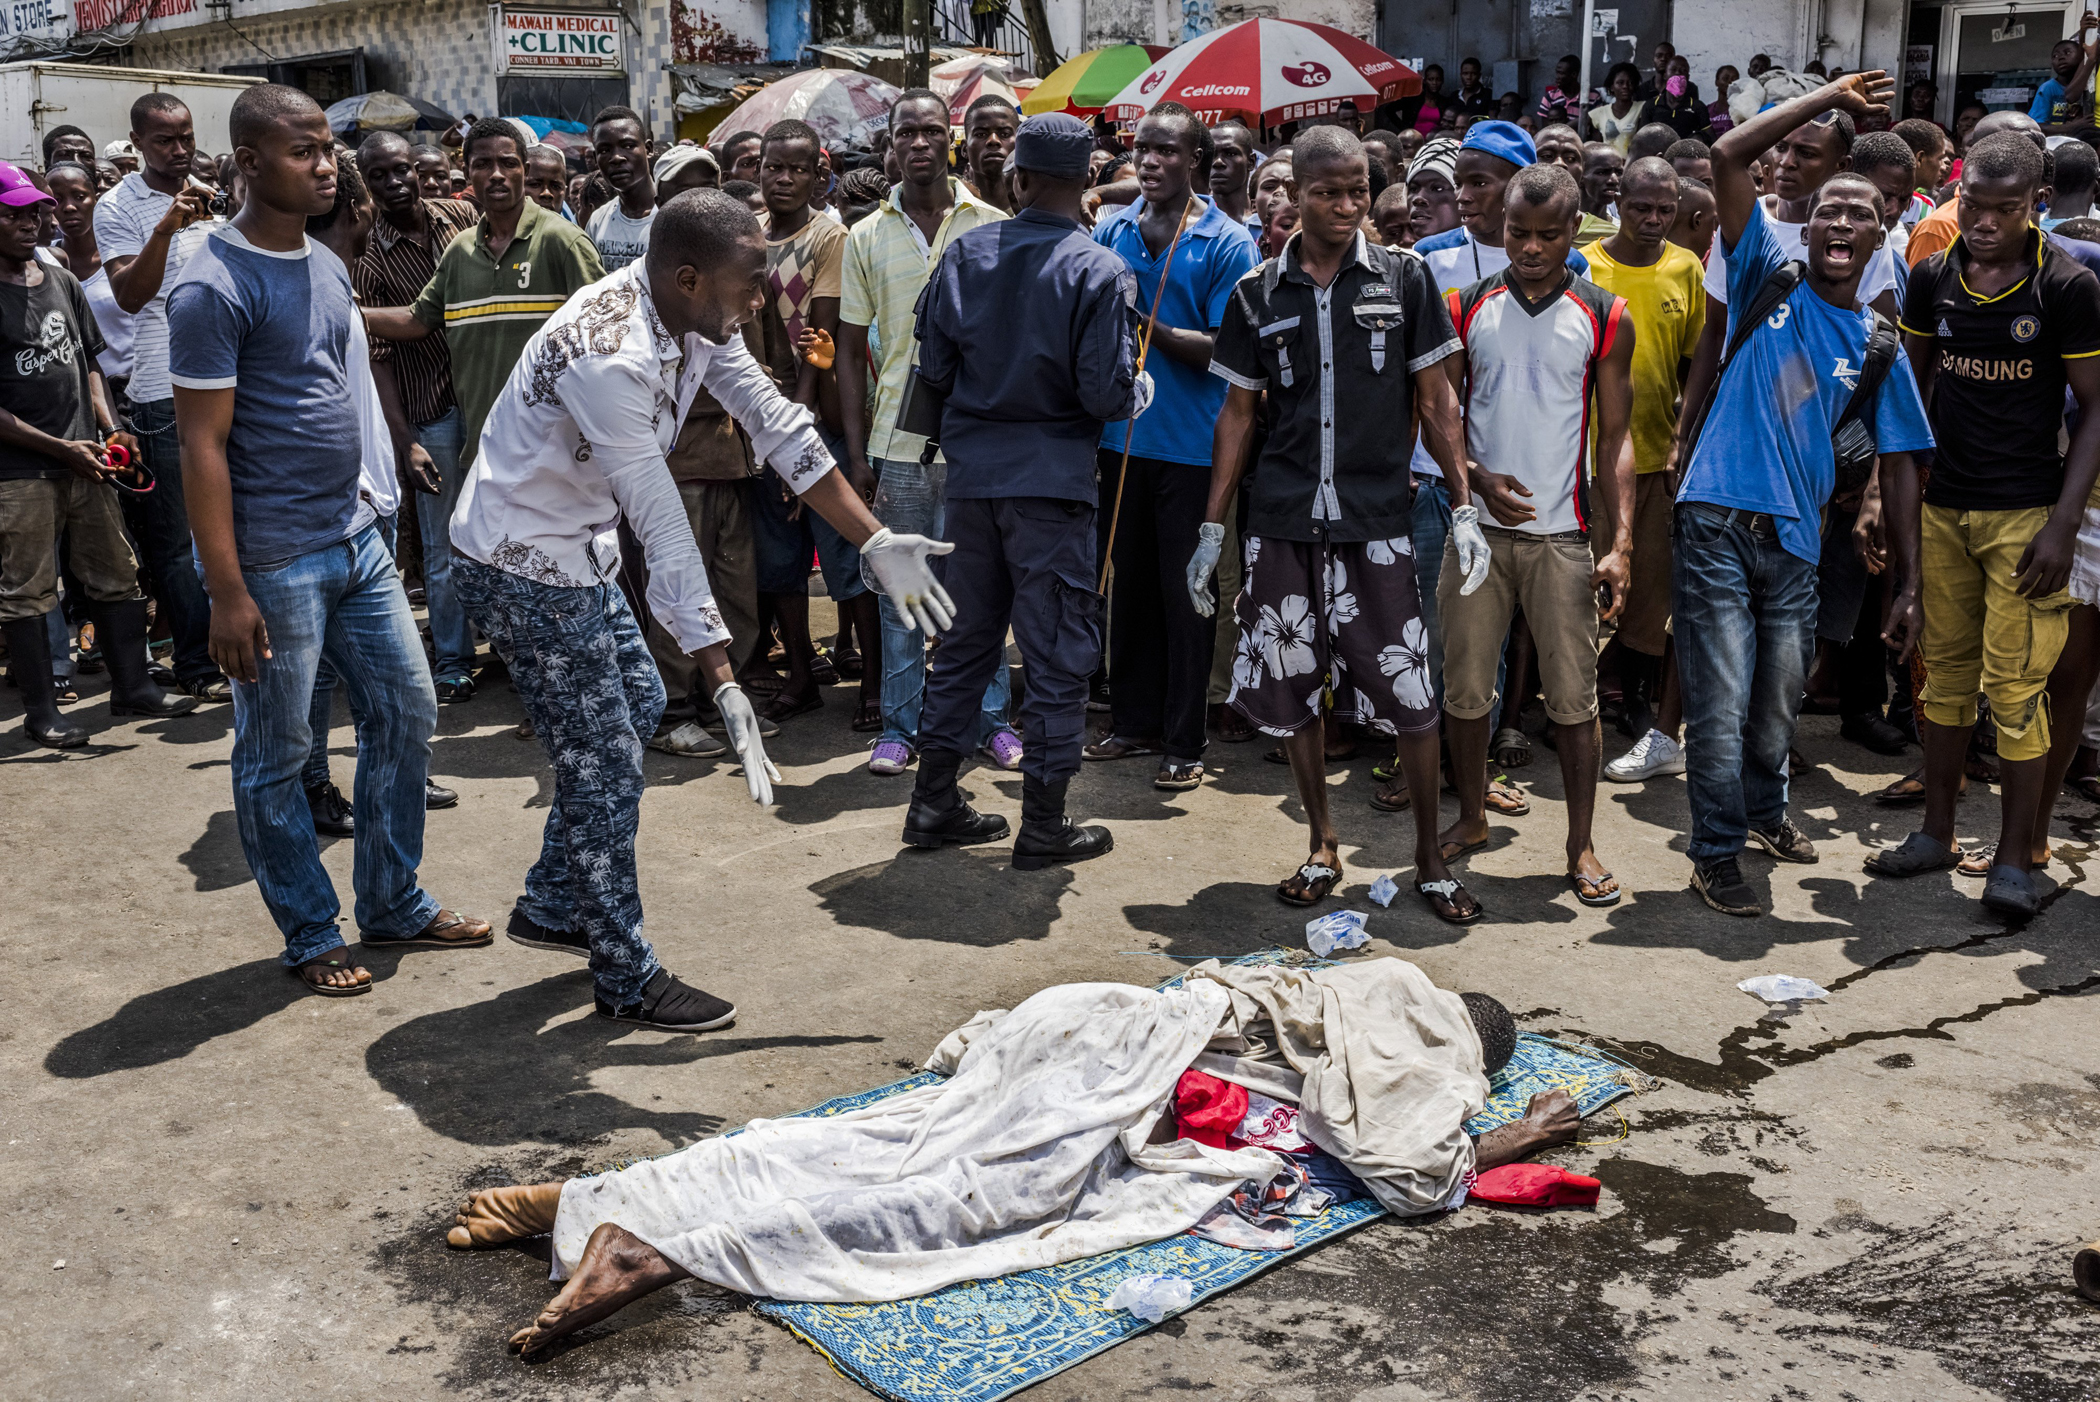 Residents look on as the body of a man suspected of dying from Ebola lies in a busy street, after it was reportedly dragged there to draw attention of burial teams following days of failed attempts by his family to have his body picked up, in Monrovia, Liberia, Sept. 15, 2014. (Daniel Berehulak—The New York Times/Redux)